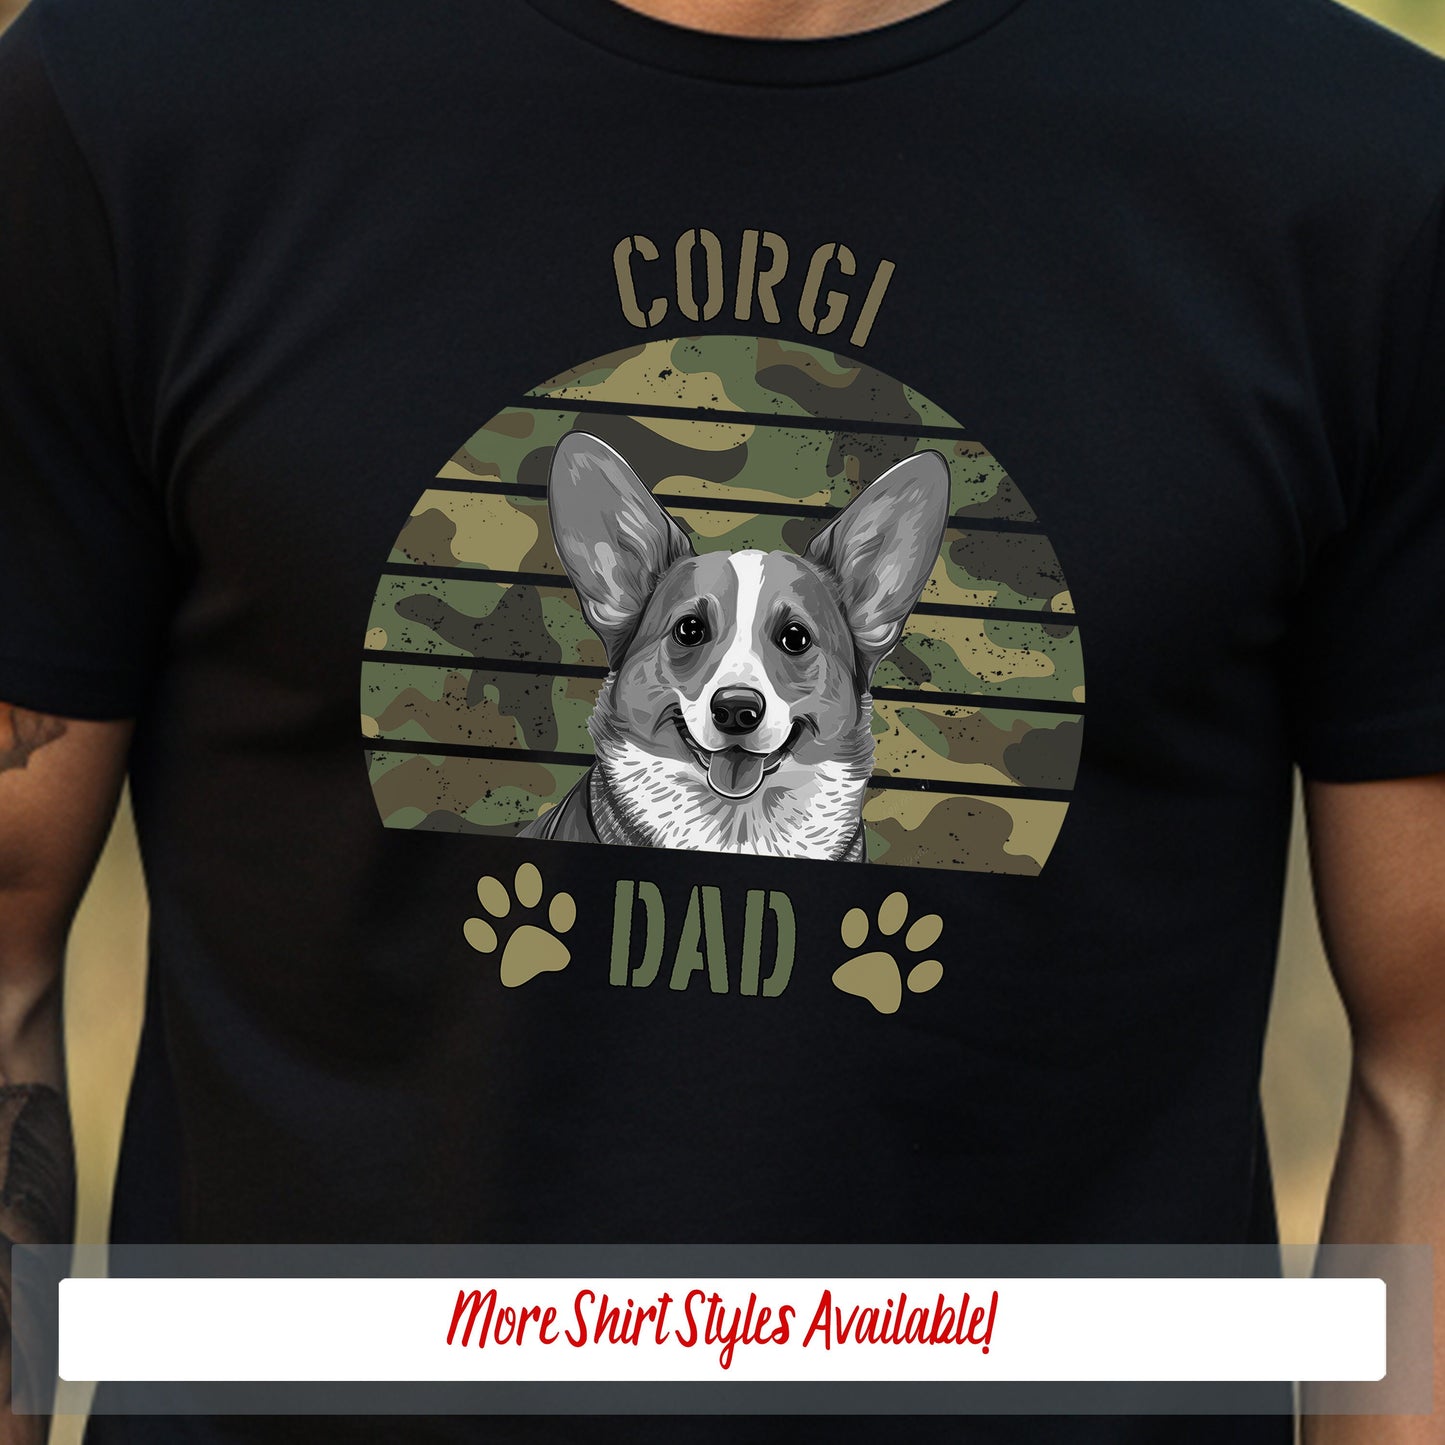 a man wearing a black shirt with a picture of a corgi on it